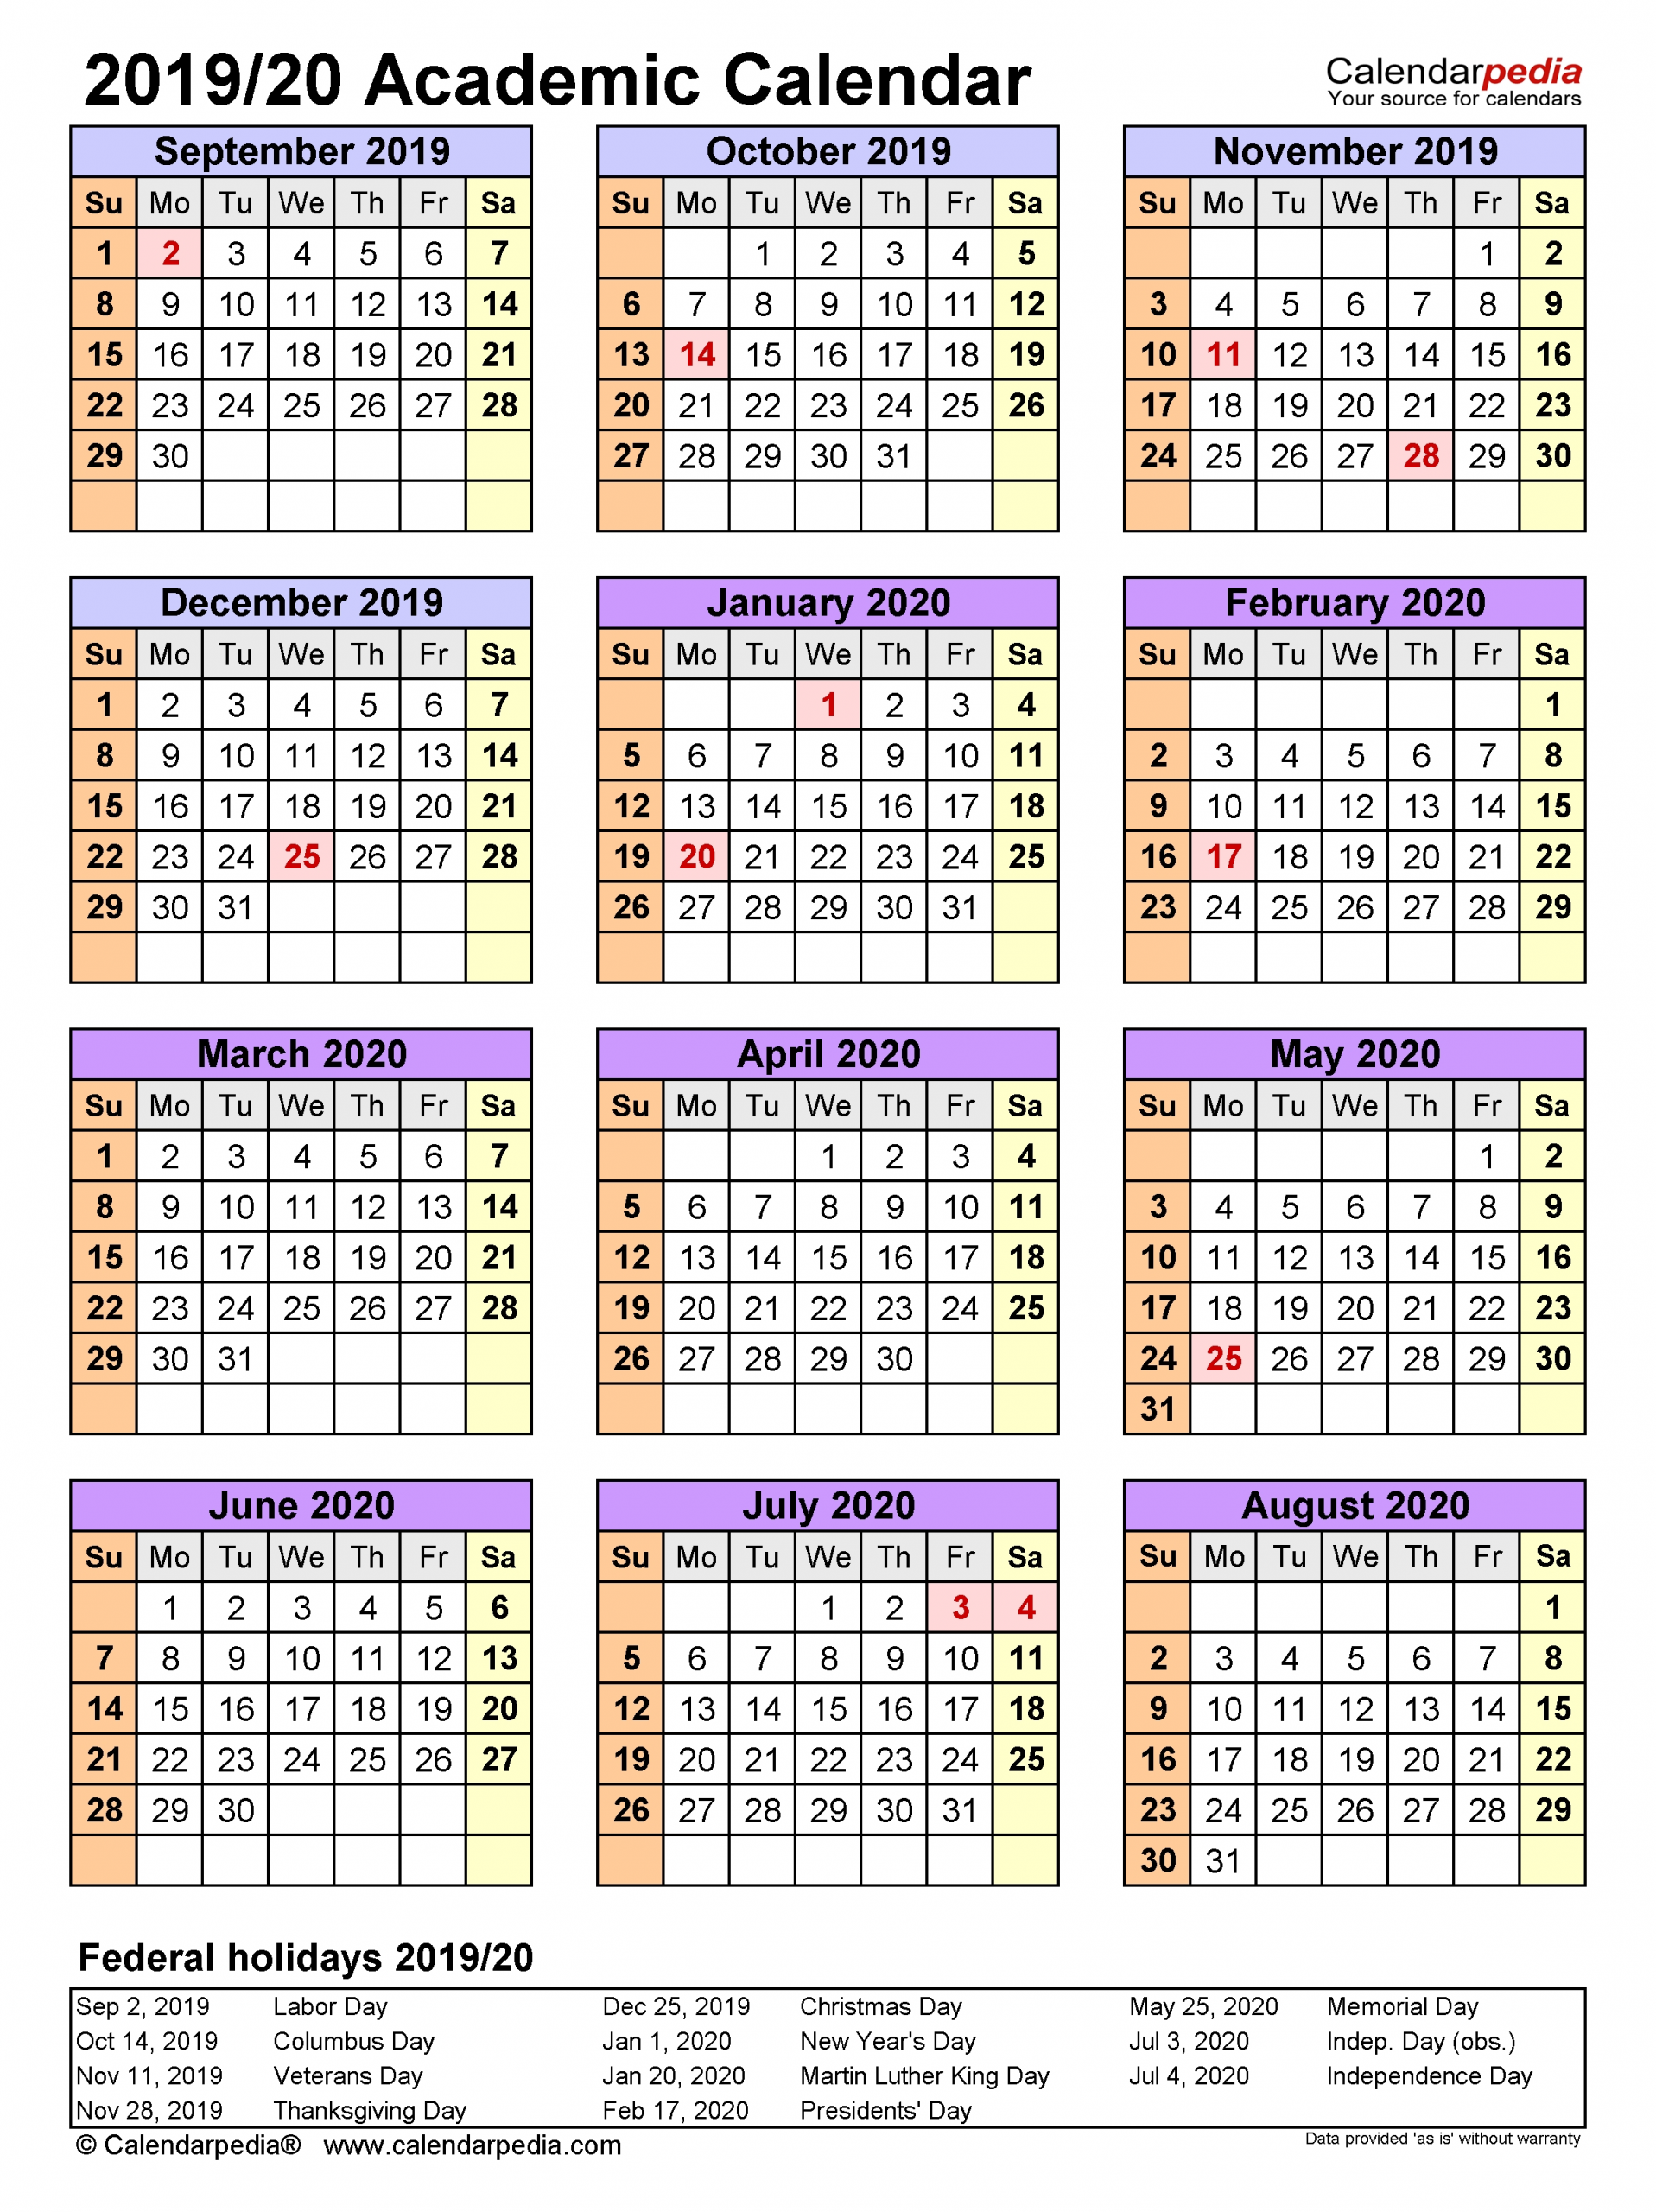 Get Academic Calendar With Space In Dates